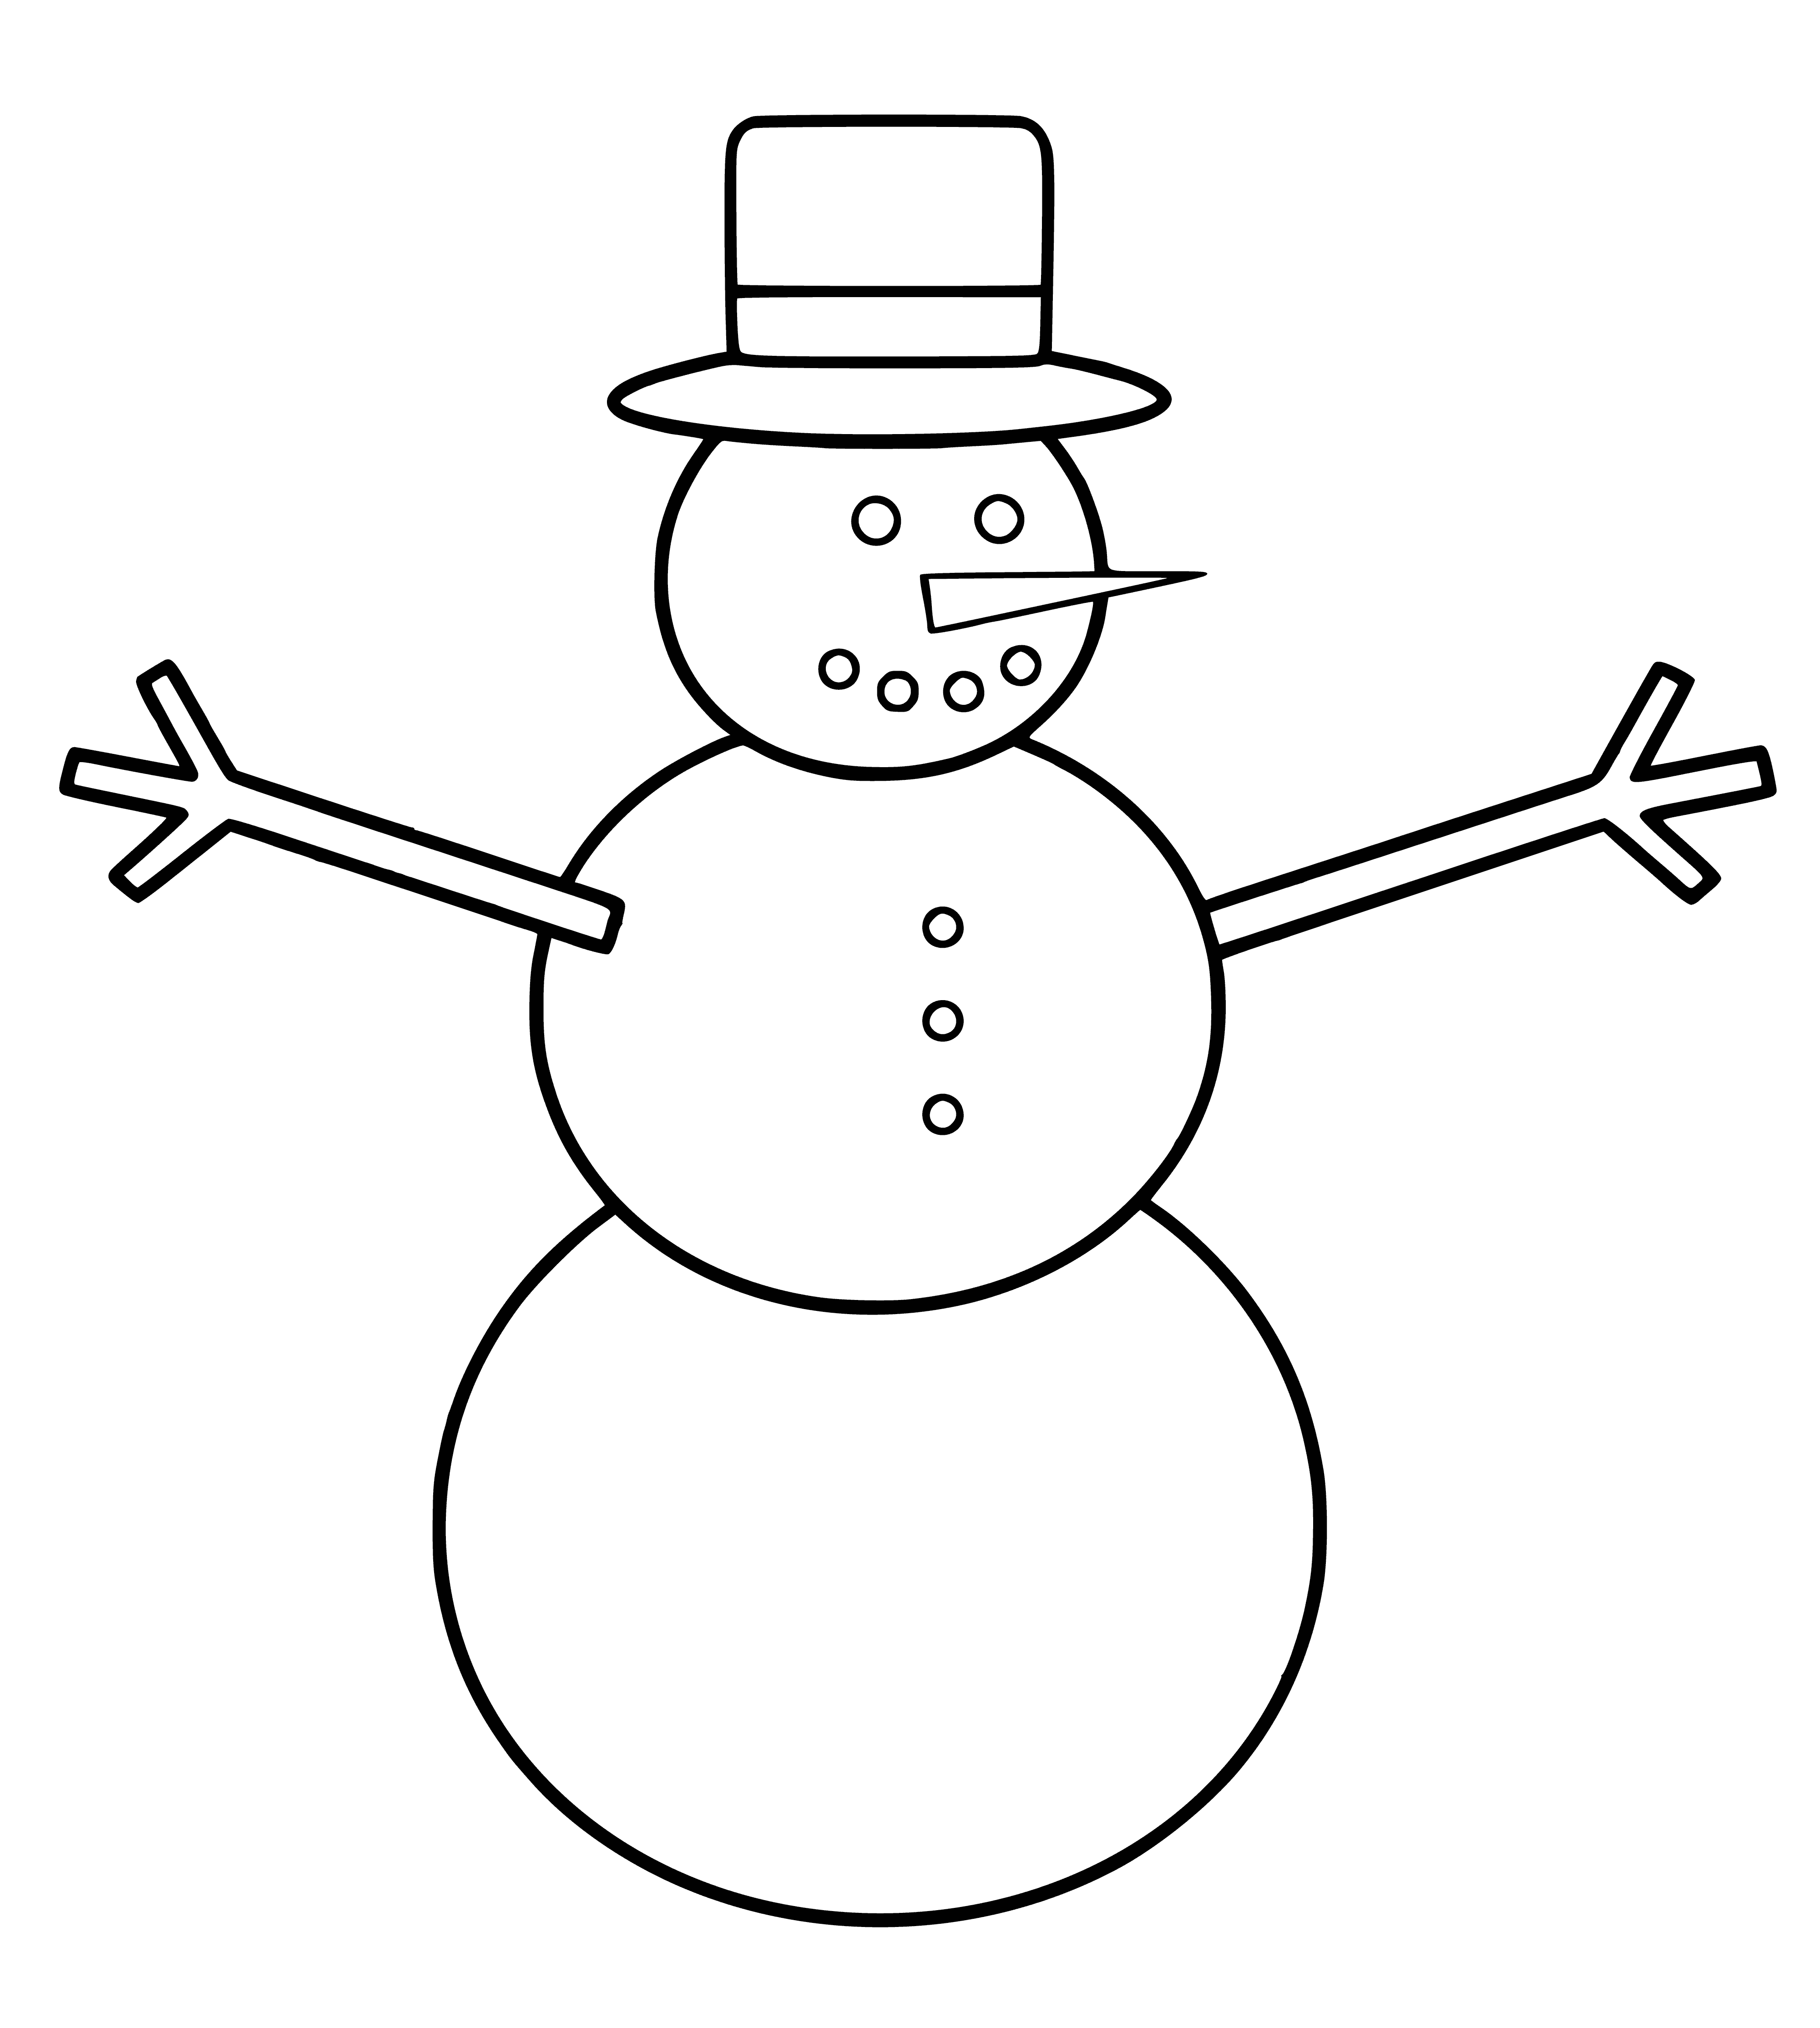 coloring page: 3 snowmen with diff. size, carrot, black & green button noses, coal eyes, red, blue & orange scarves & top hats in diff. colors.